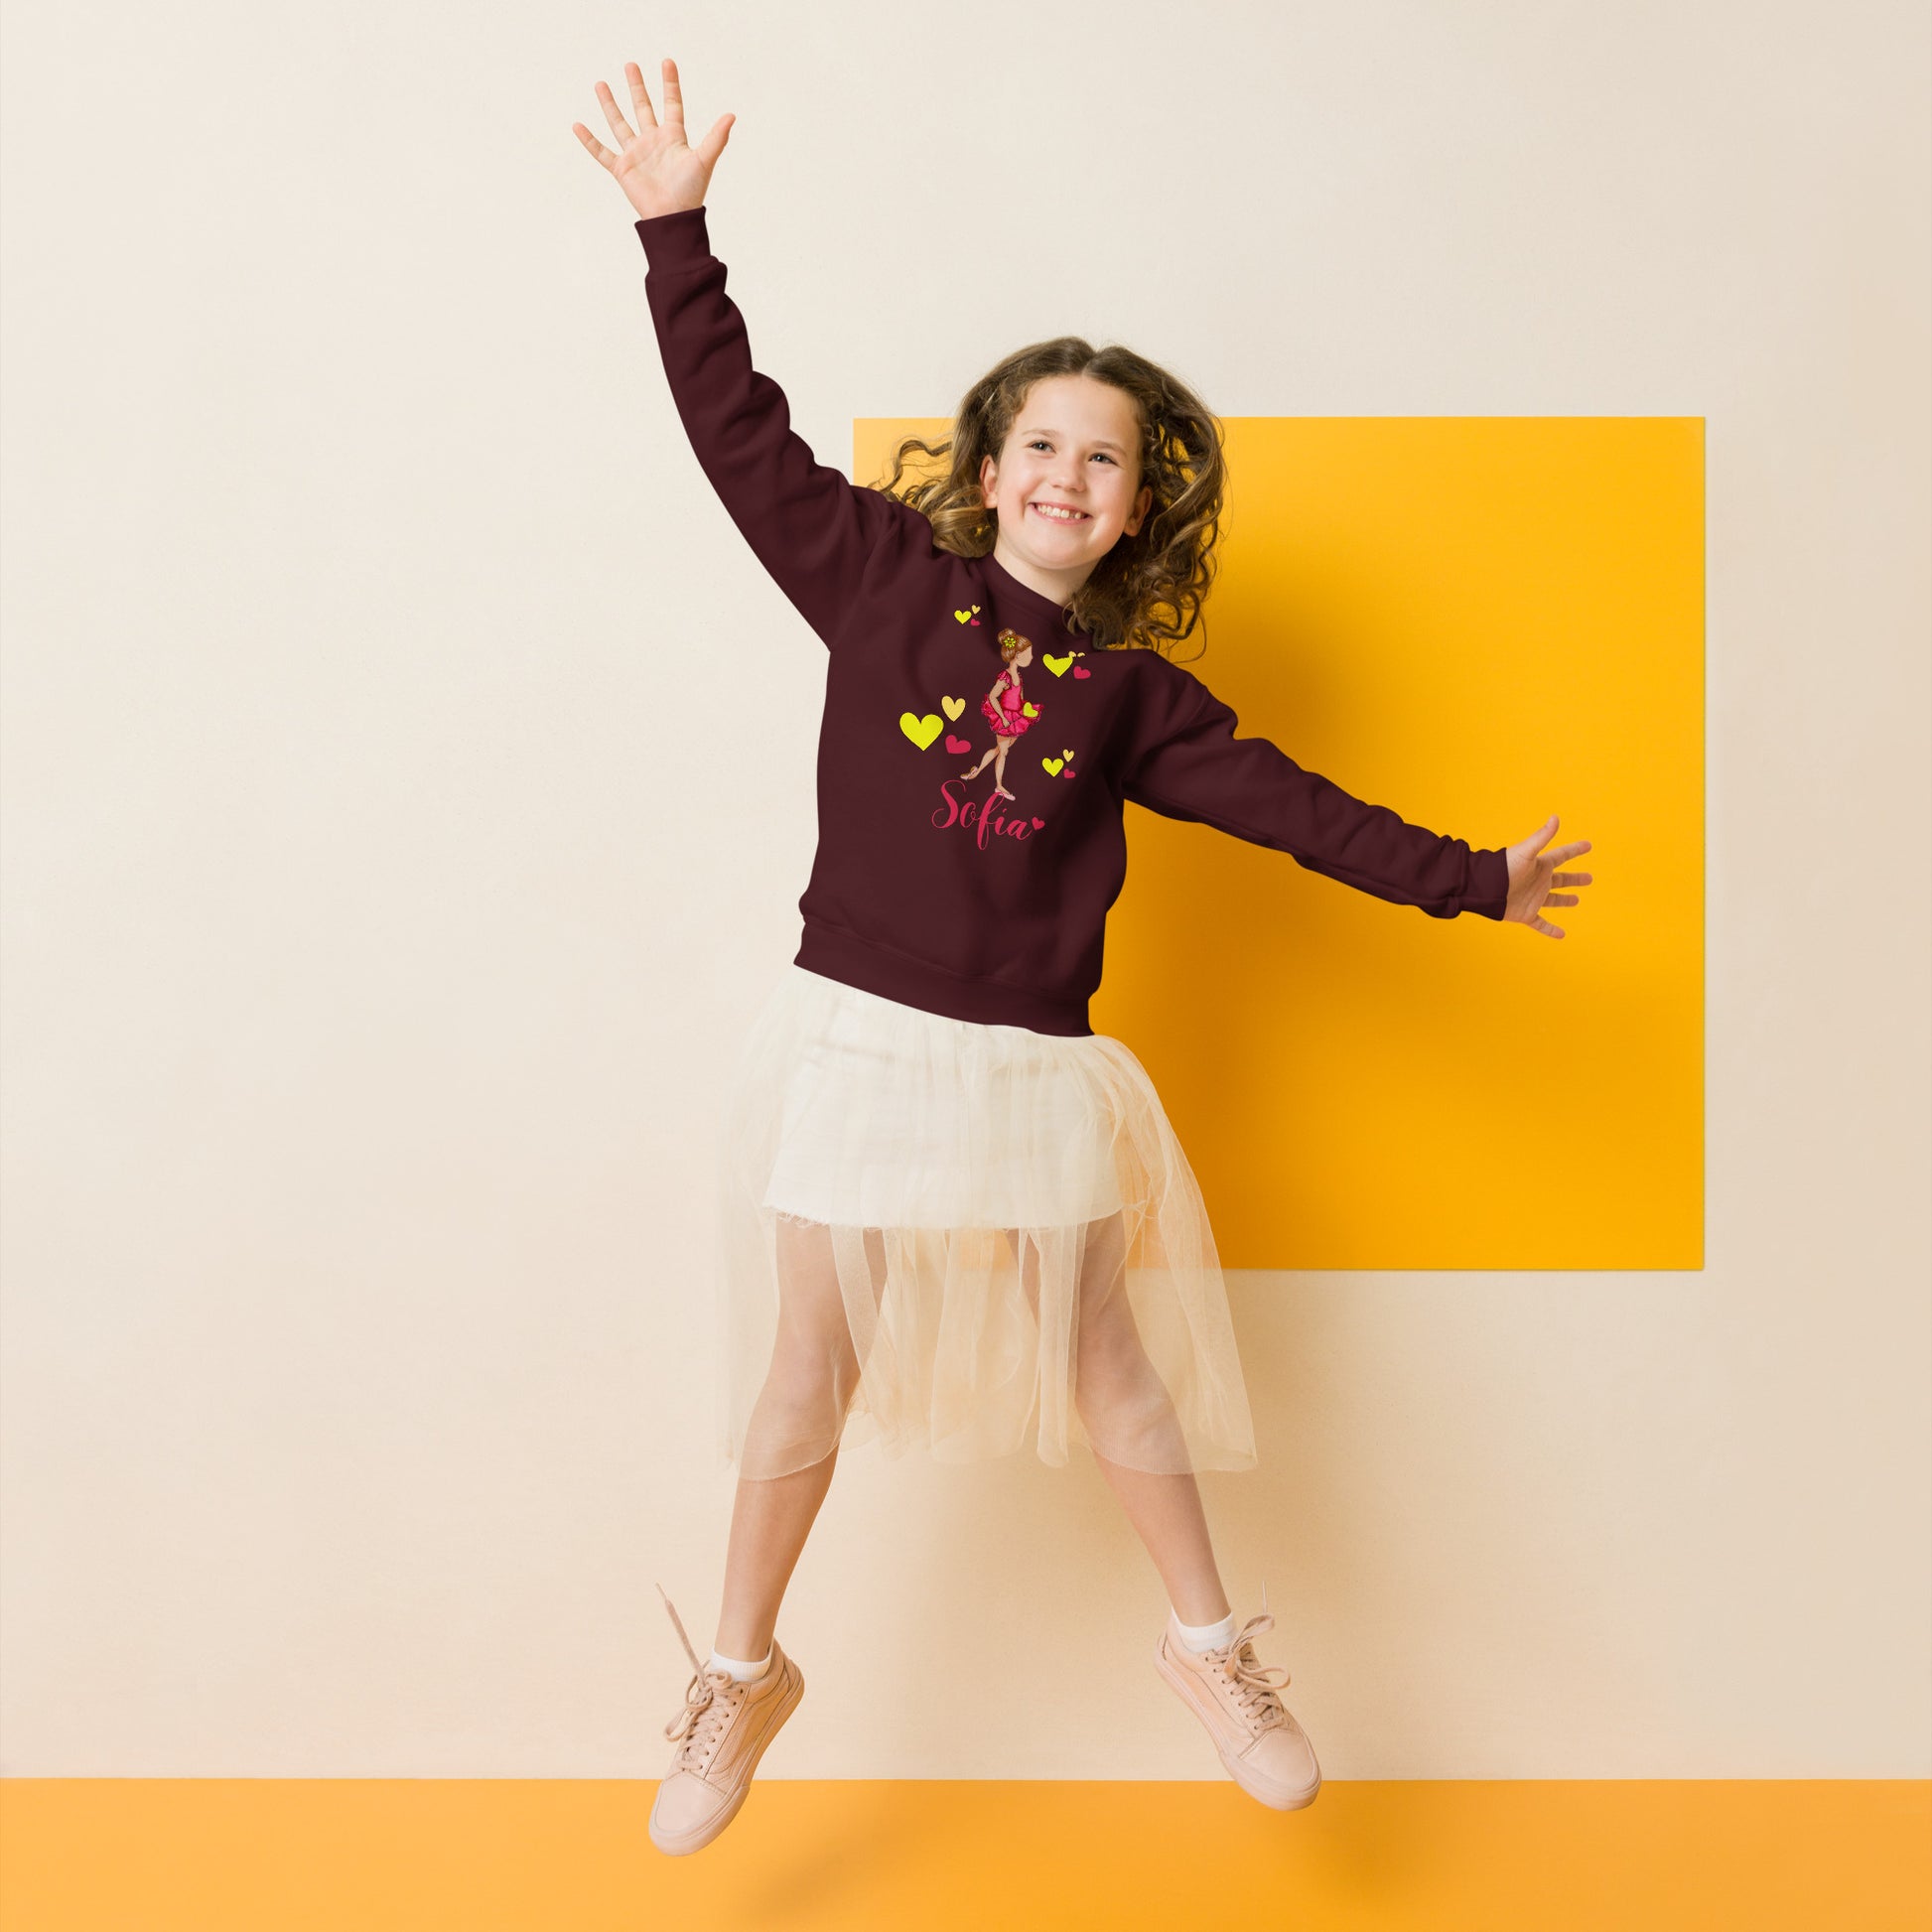 a young girl is jumping in the air